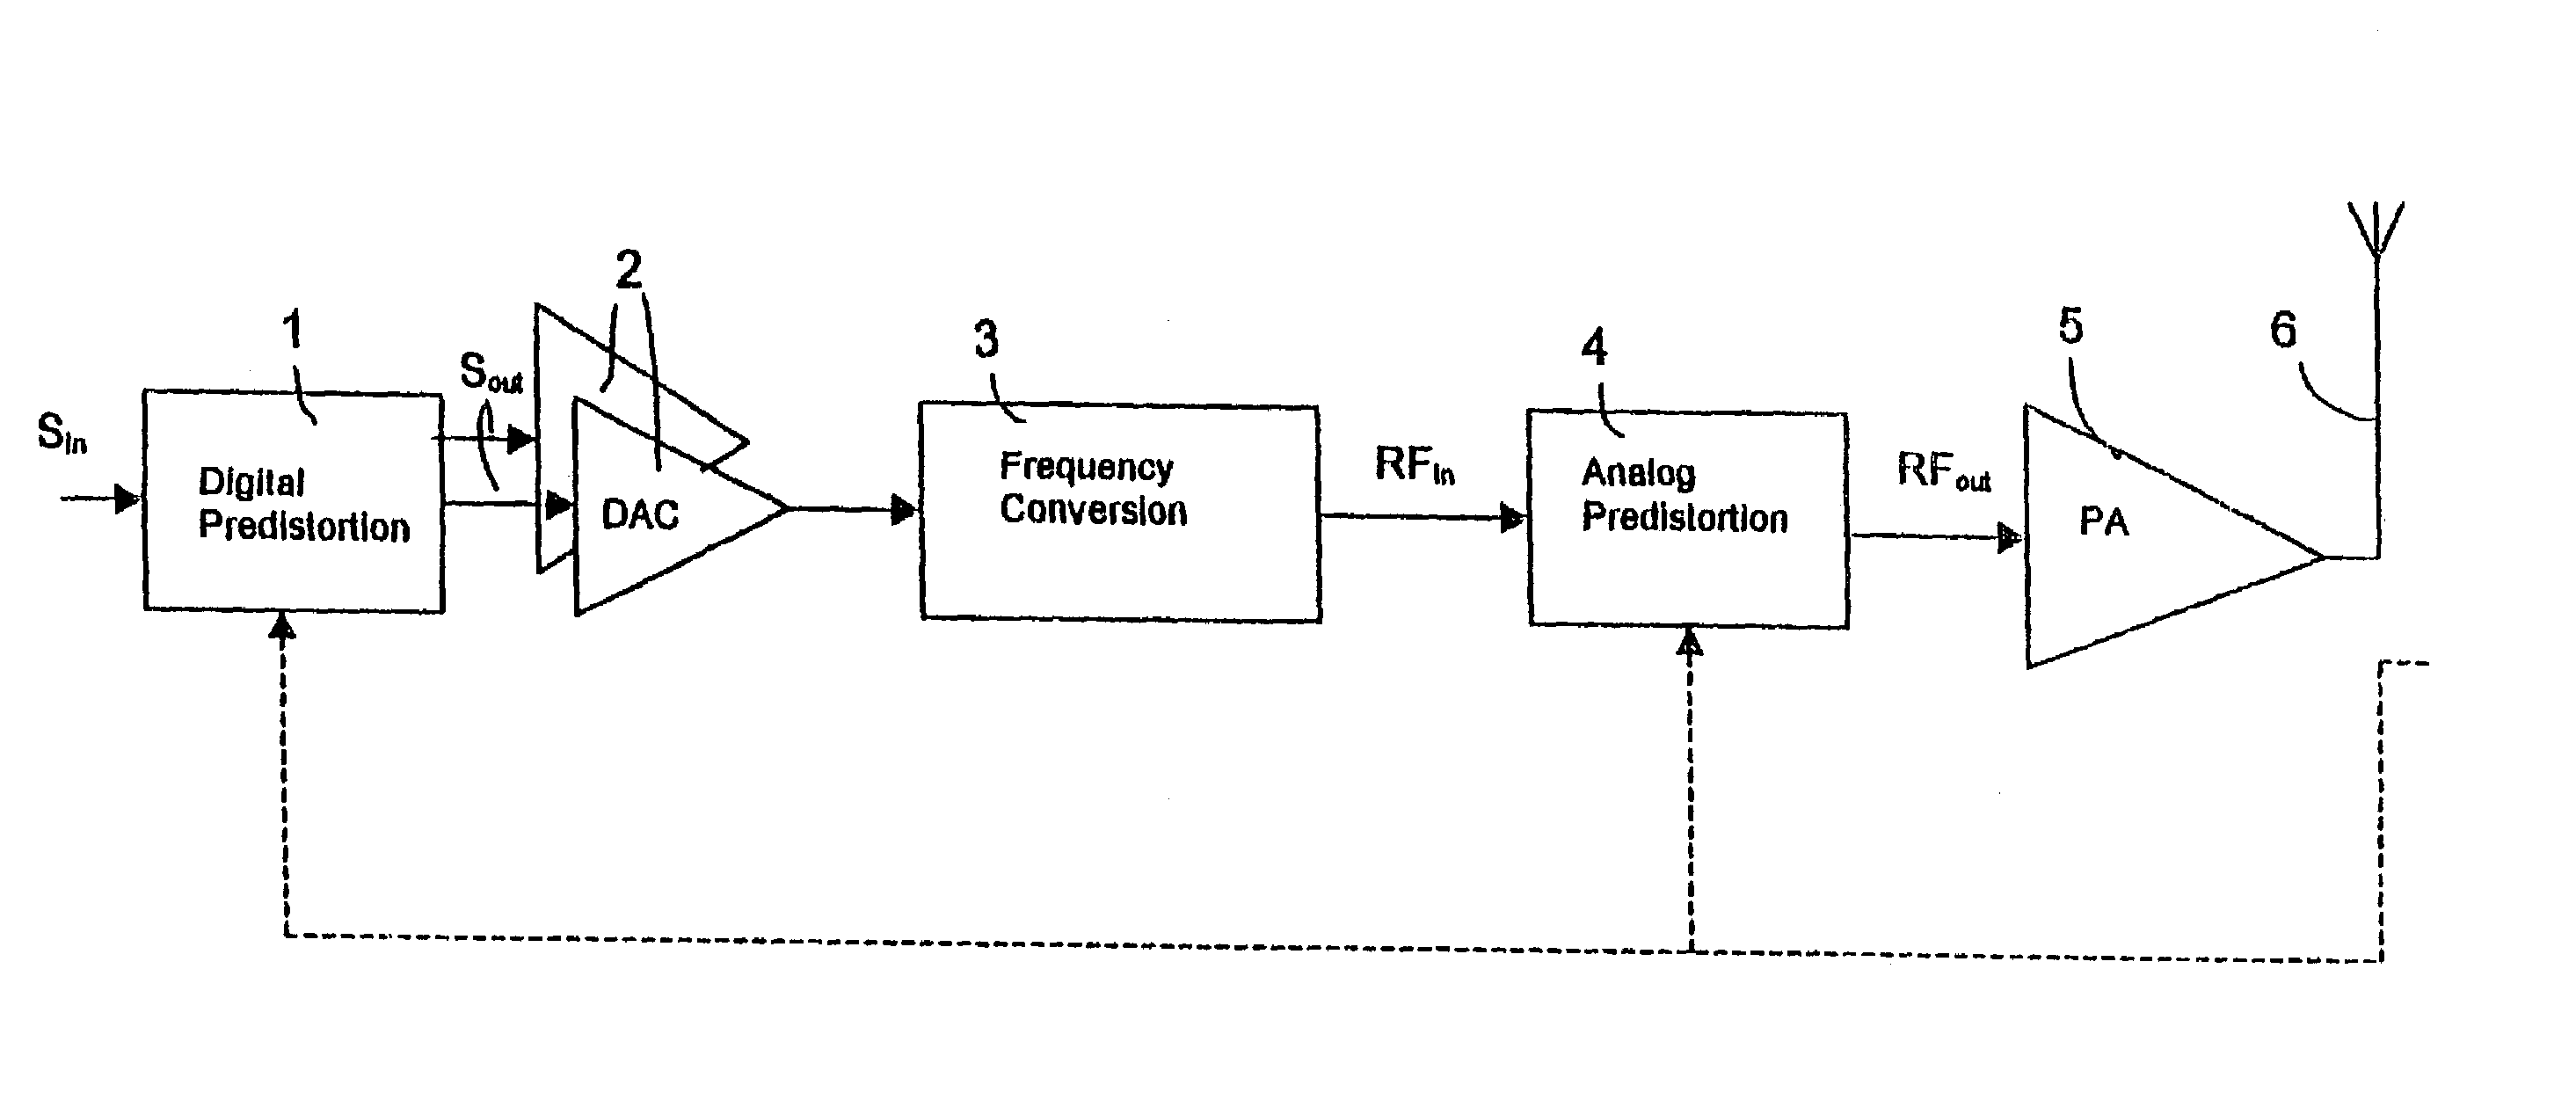 Method and apparatus for generating a radio frequency signal